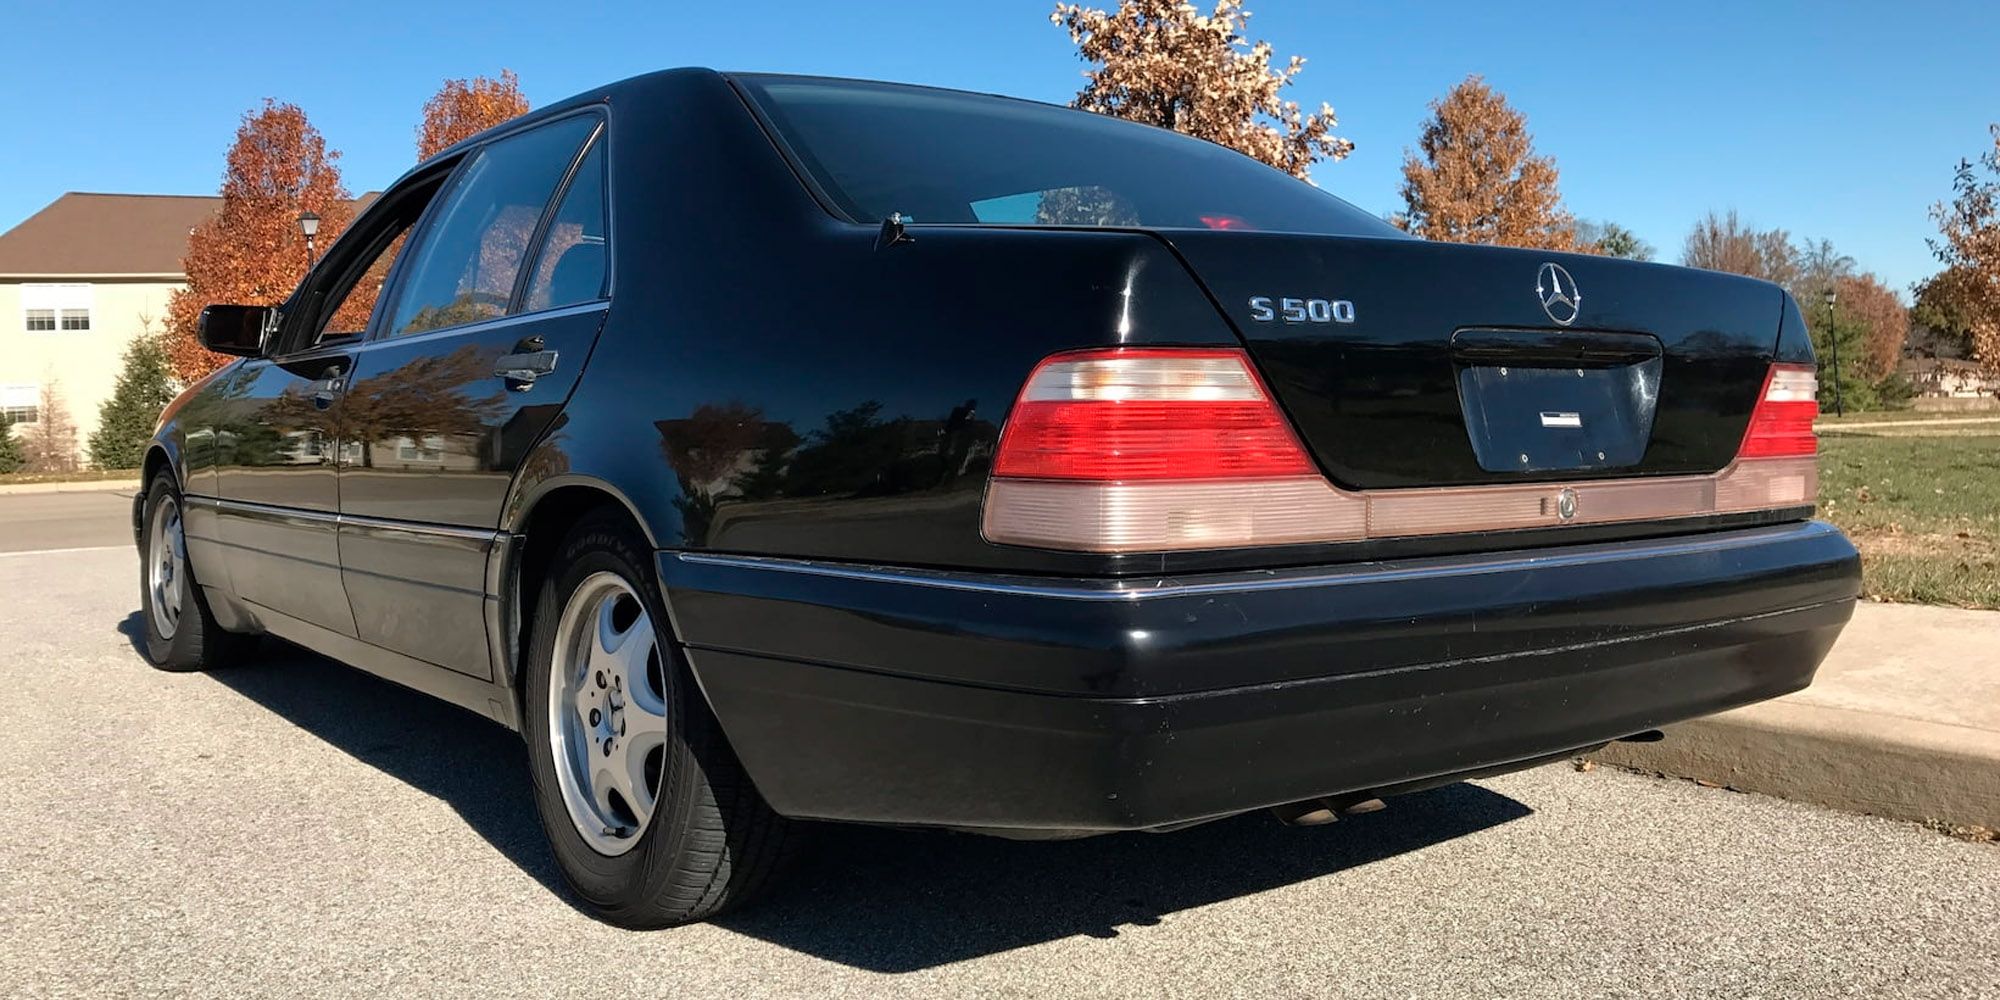 The rear of the W140 S500